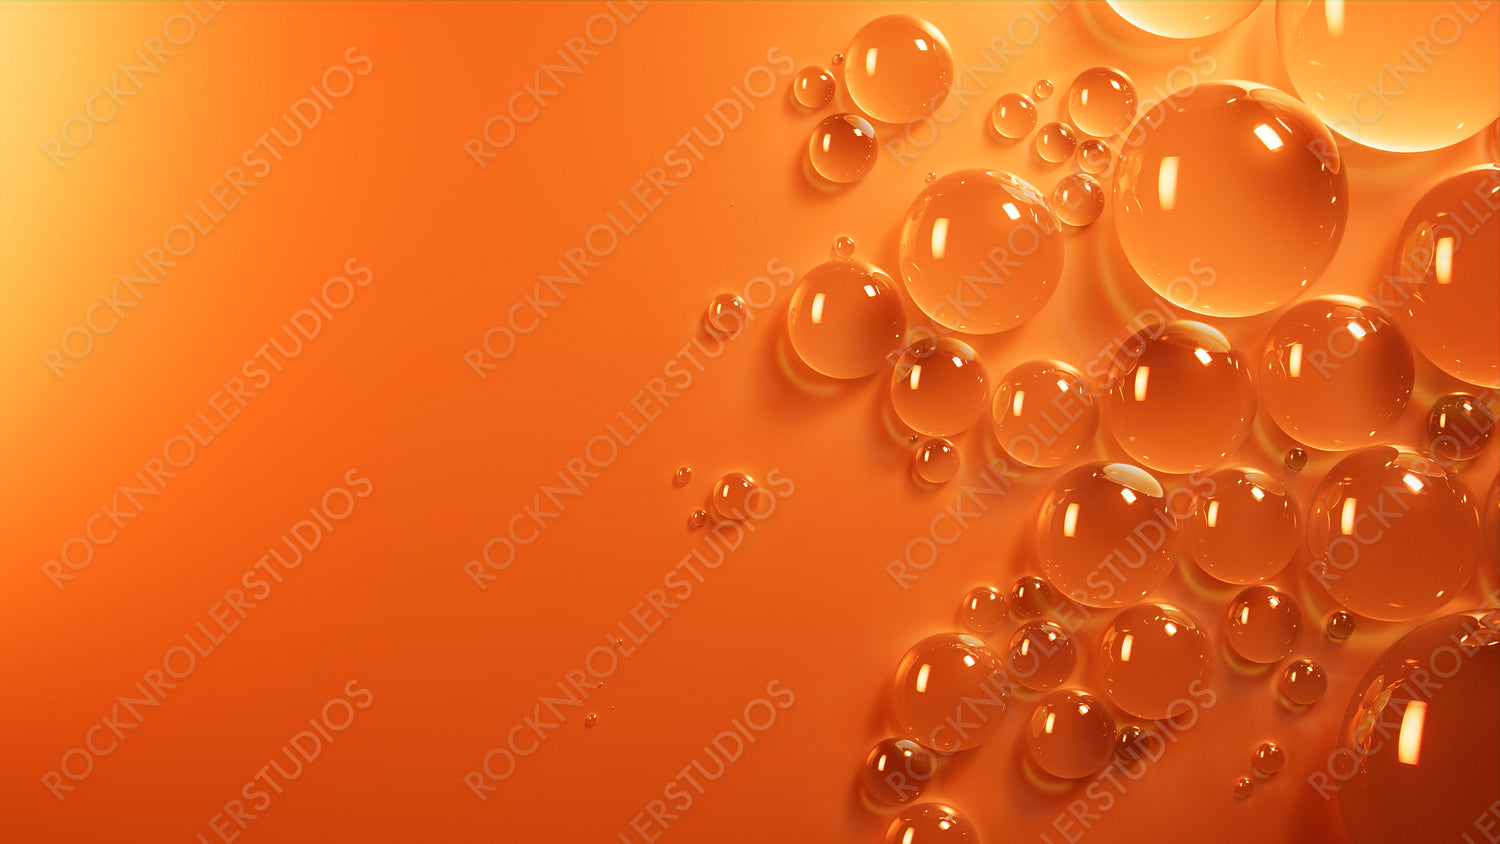 Orange and Yellow Background with Dew Droplets on Surface. Contemporary Banner with Copy-Space.